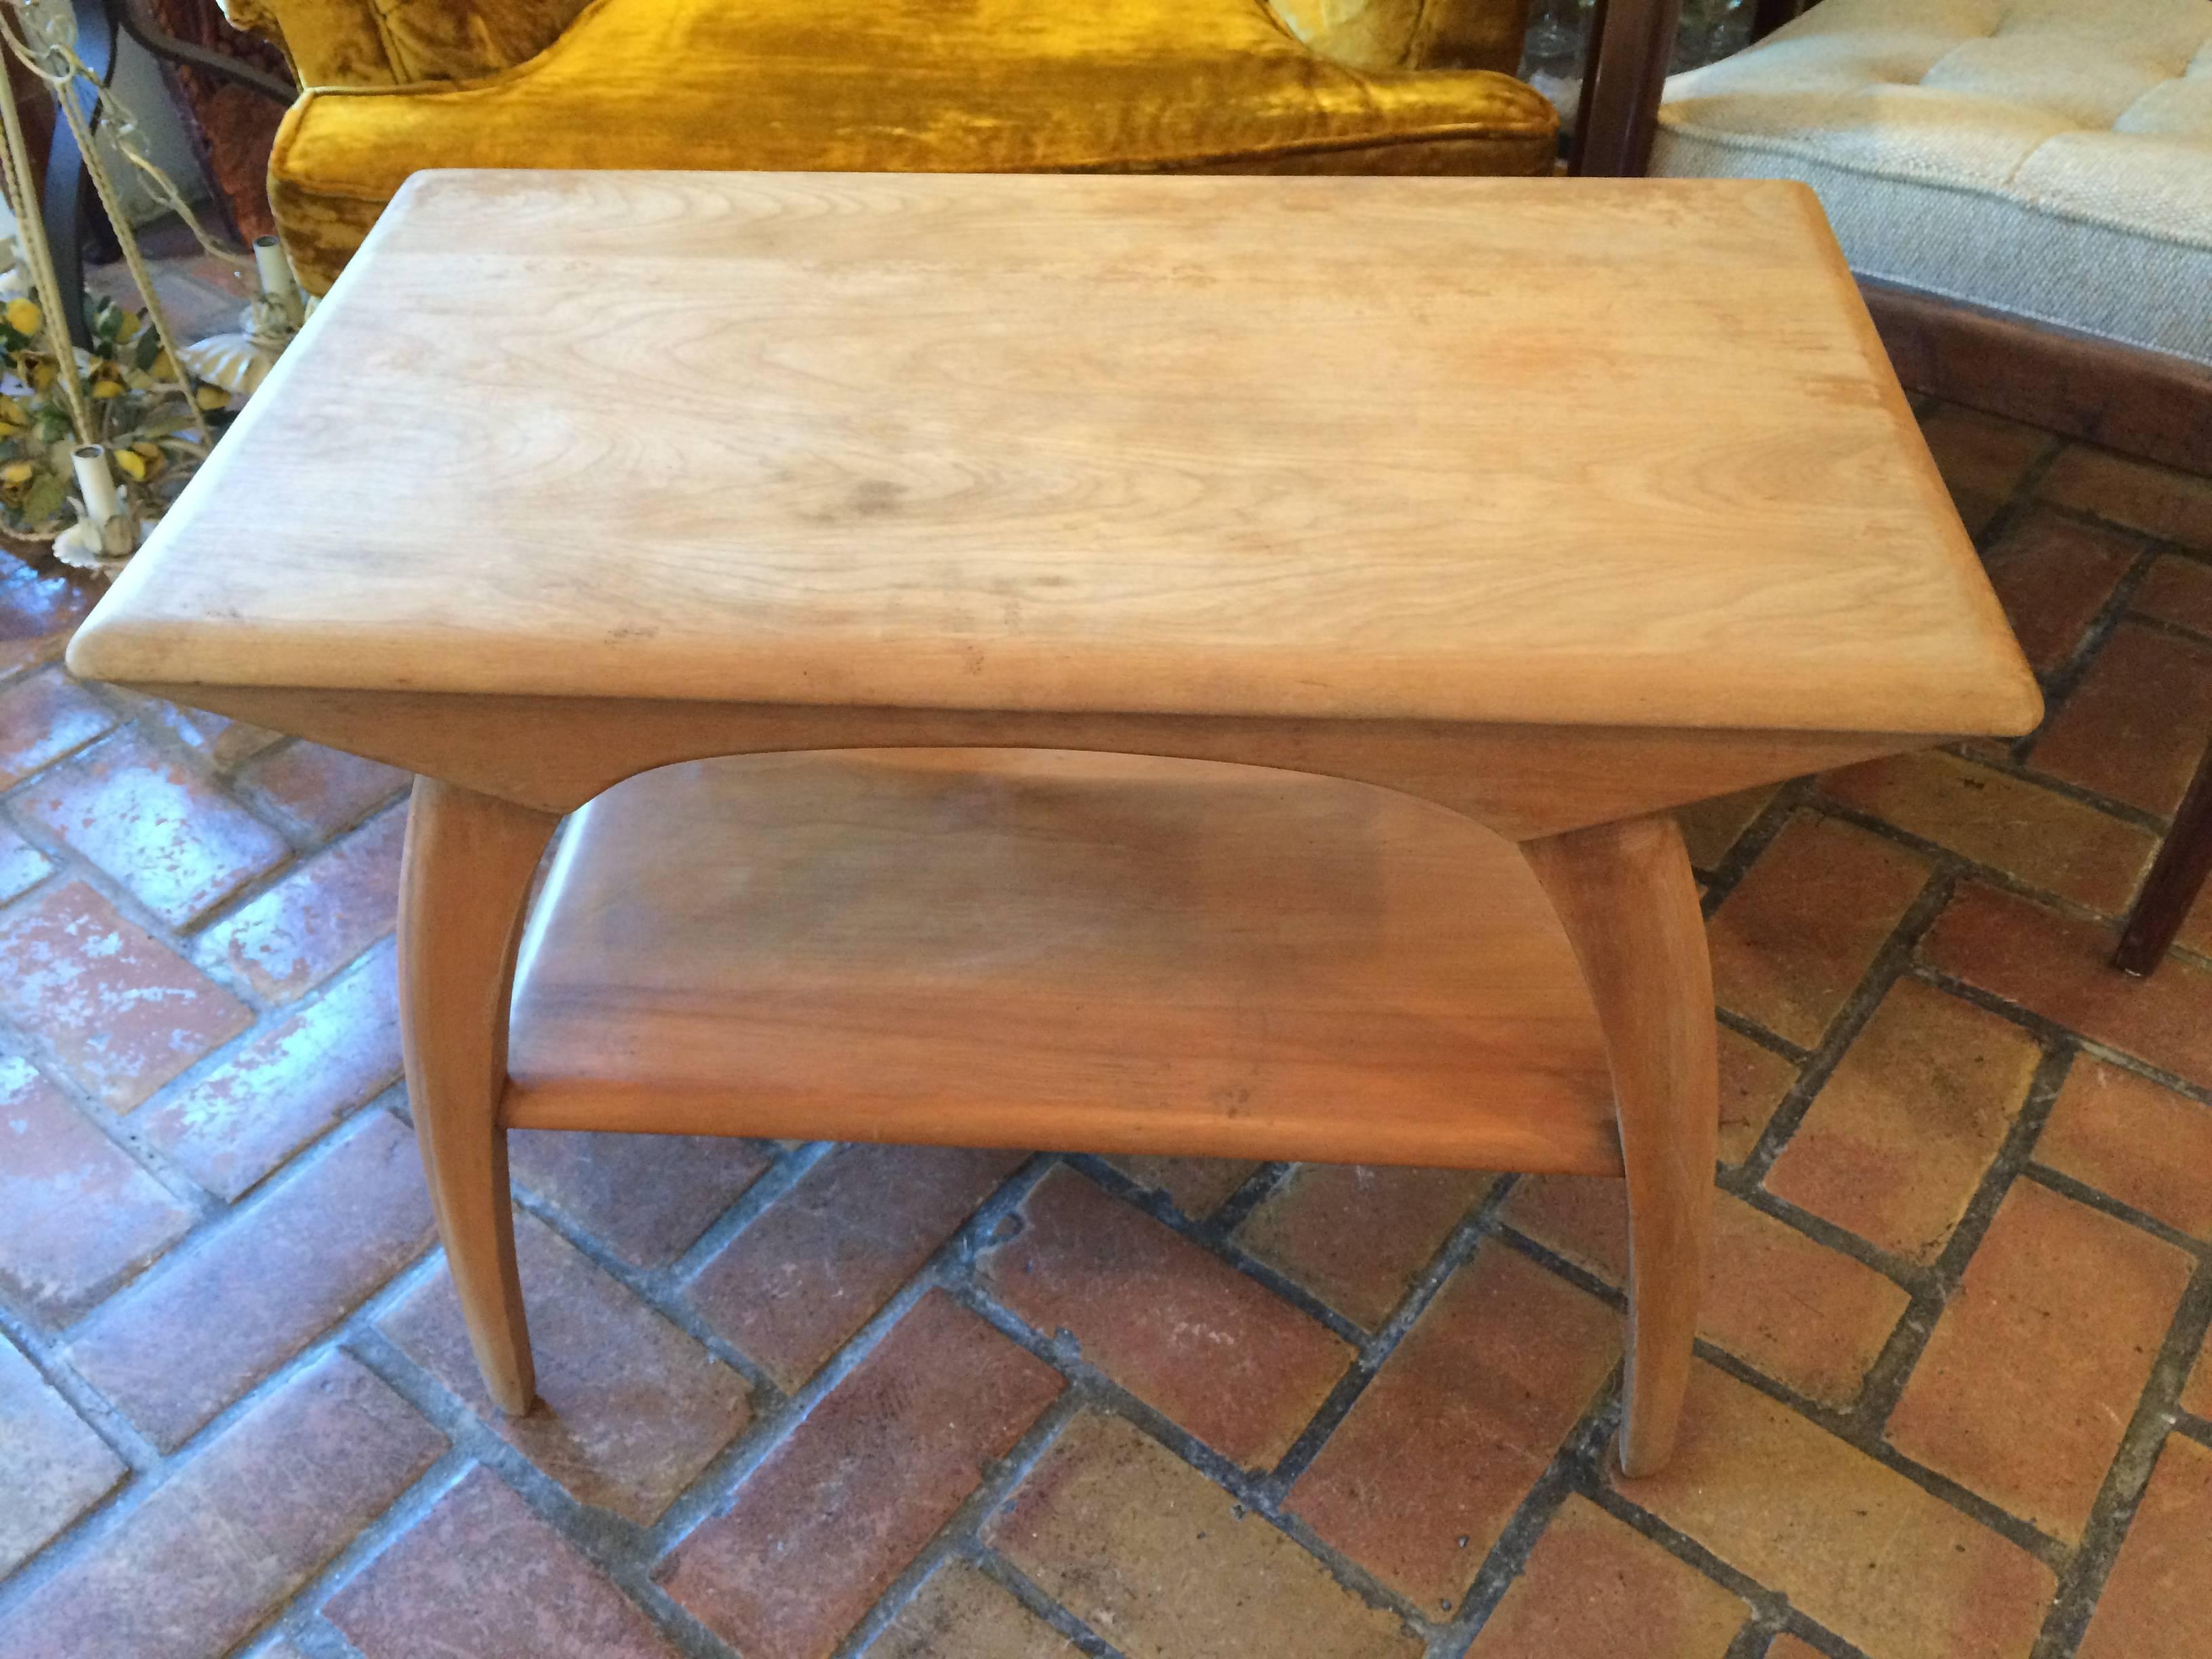 Heywood-Wakefield side or end table. Signed and stamped. Blond wood Champagne color. Needs to be refinished.